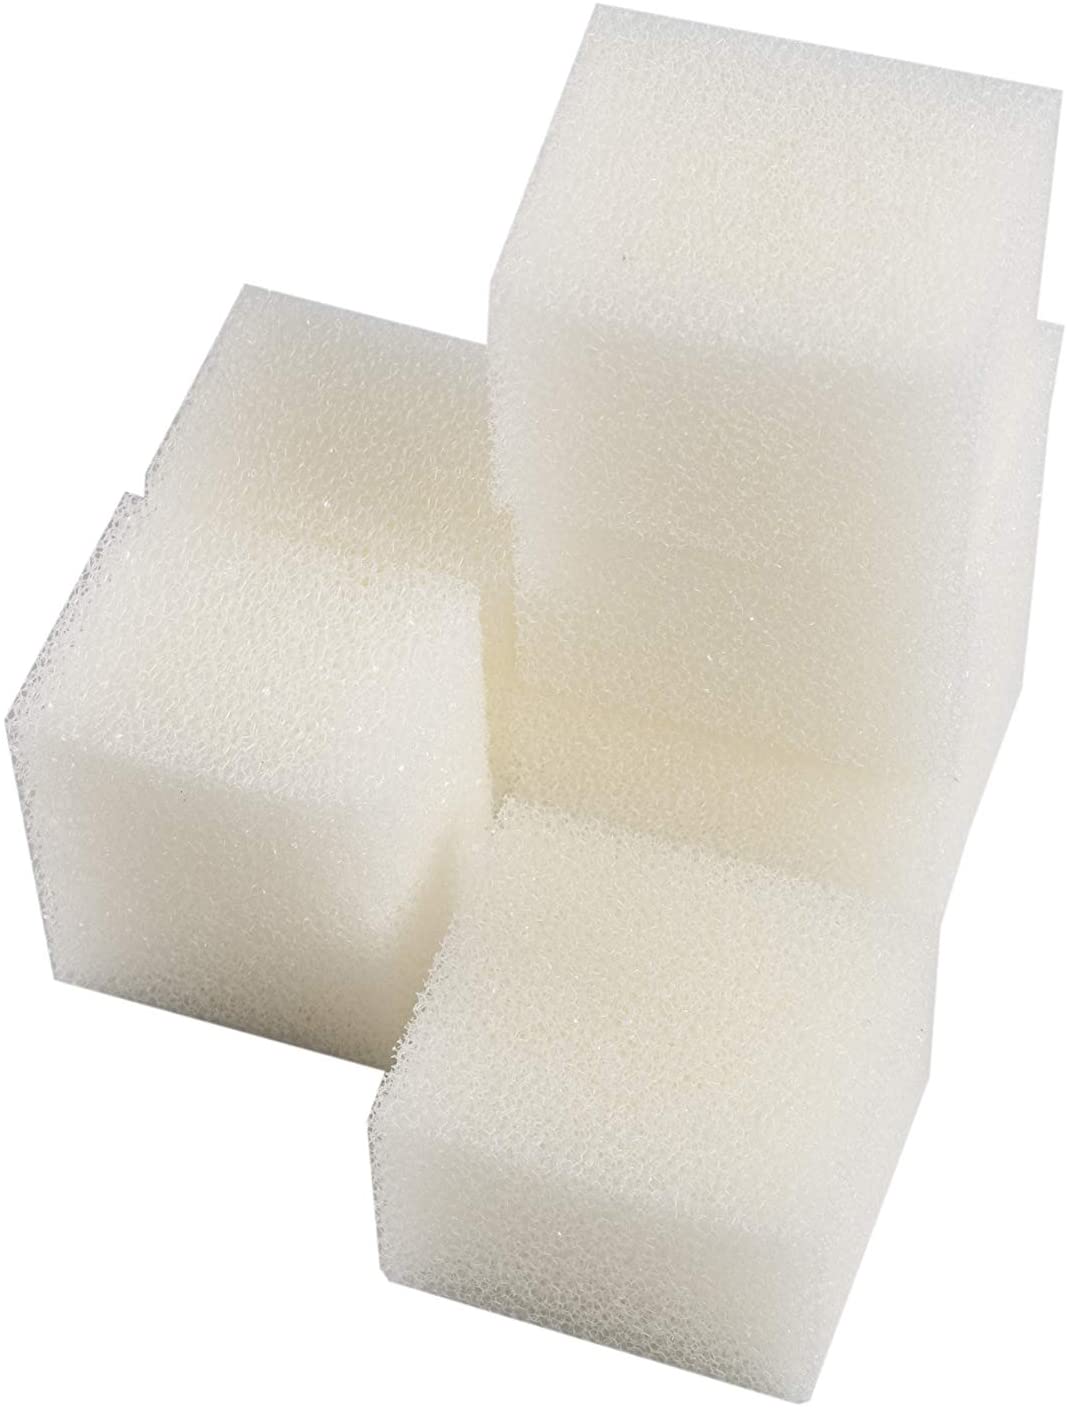 LTWHOME Compatible Foam Filters Non-Branded Suitable for Fluval Edge Filter (Pack of 6)